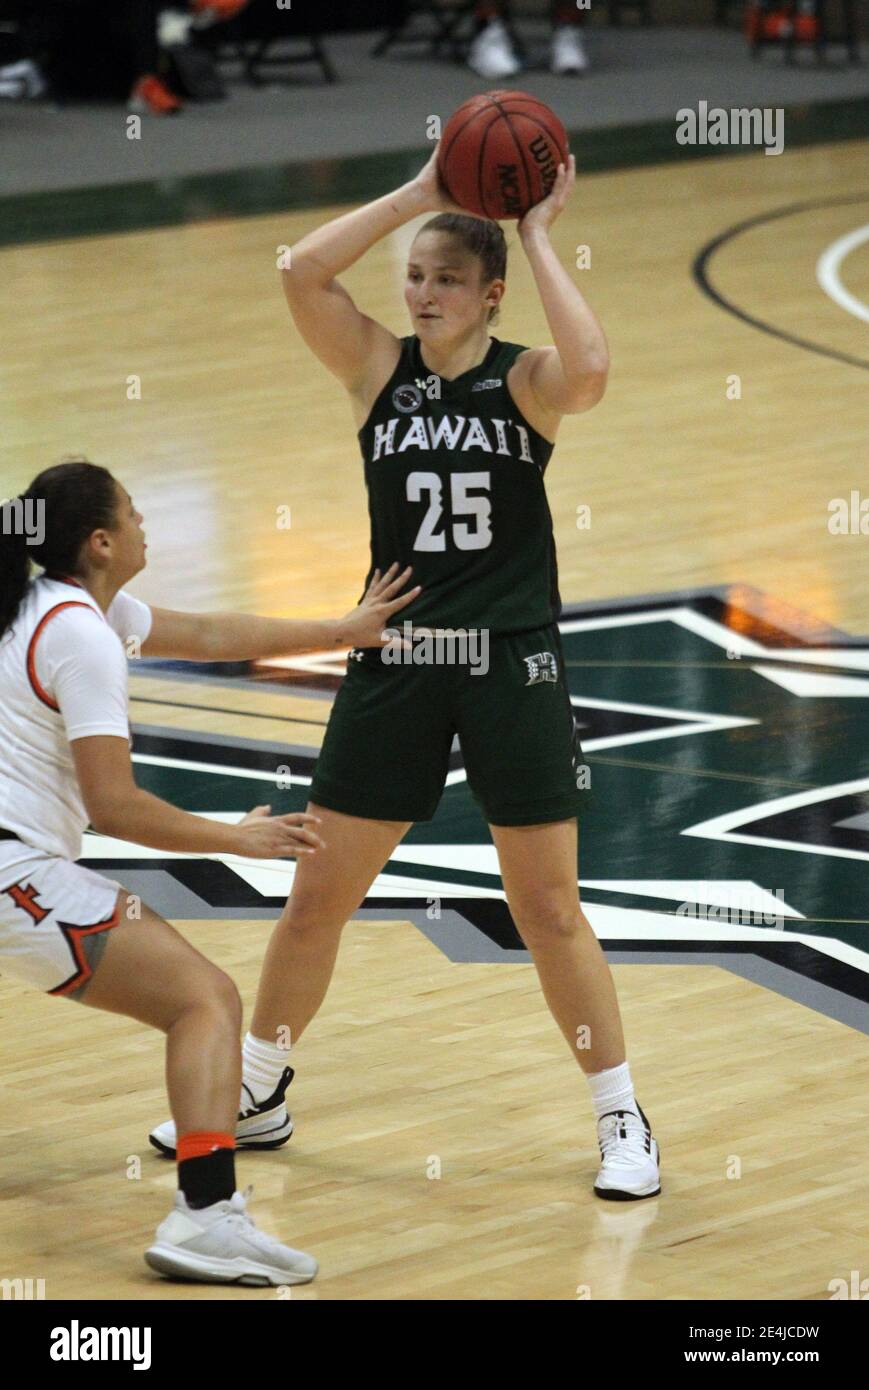 January 23, 2021 - Hawai'i Rainbow Wahine forward Amy Atwell #25 looks to pass the ball during a game between the Hawai'i Rainbow Wahine and the CSU Fullerton Titans at SimpliFi Arena at the Stan Sheriff Center in Honolulu, HI - Michael Sullivan/CSM Stock Photo